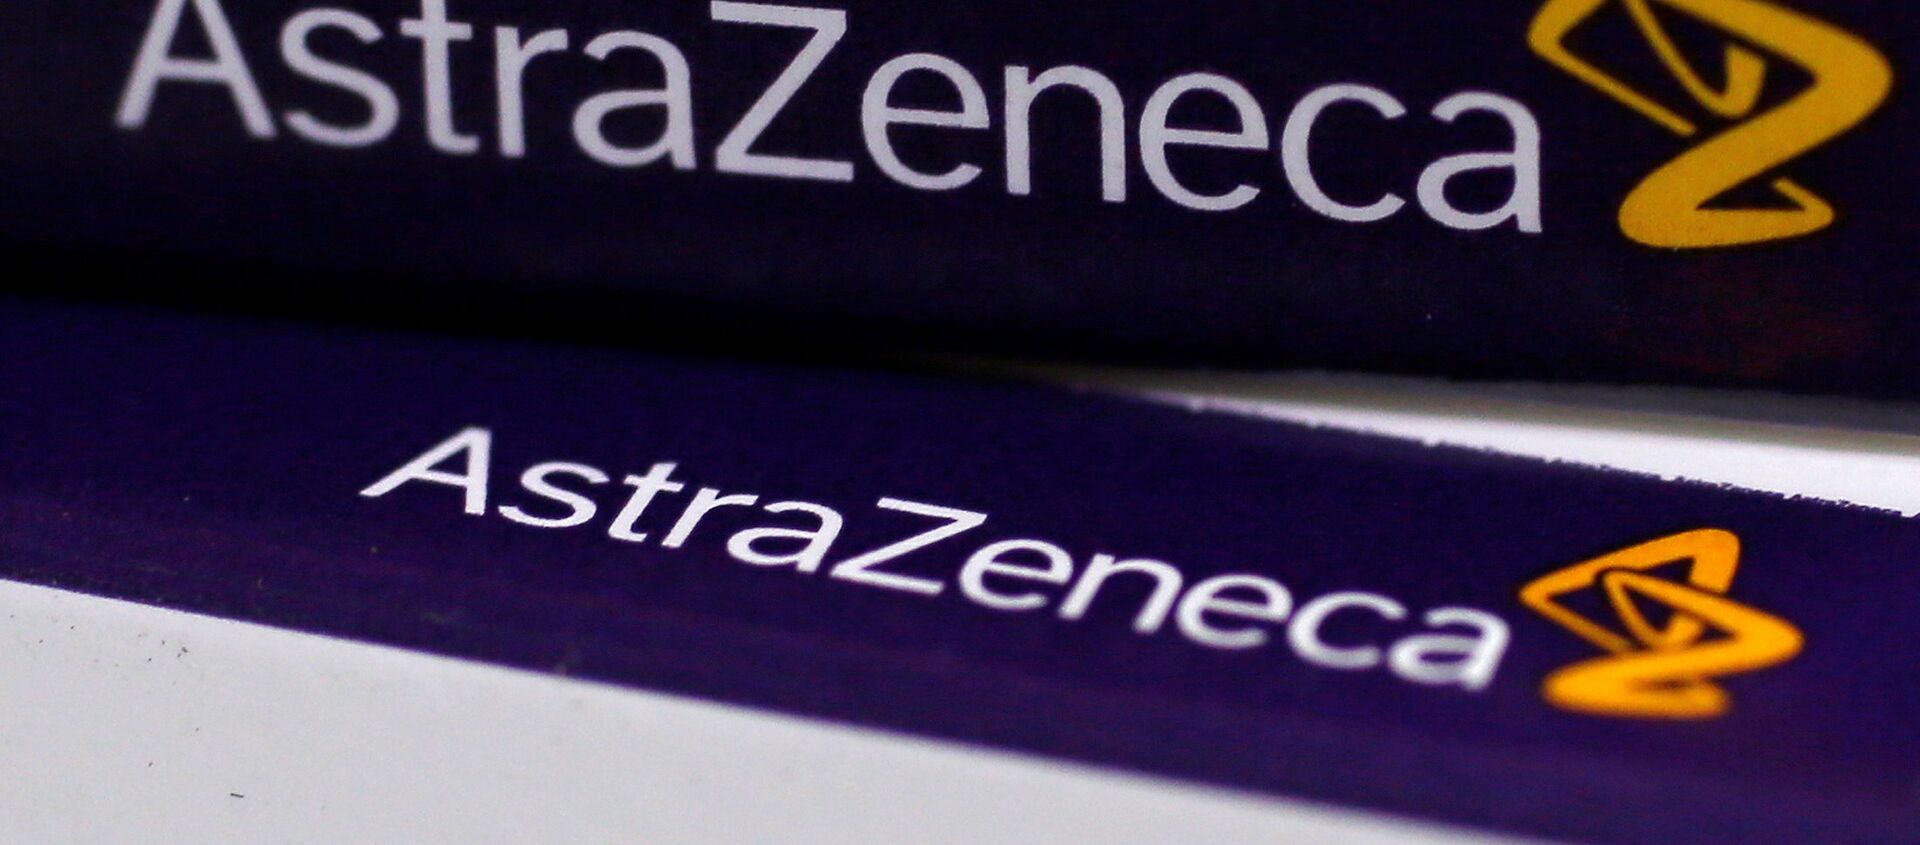 FILE PHOTO:The logo of AstraZeneca is seen on medication packages in a pharmacy in London. - Sputnik 日本, 1920, 08.03.2021